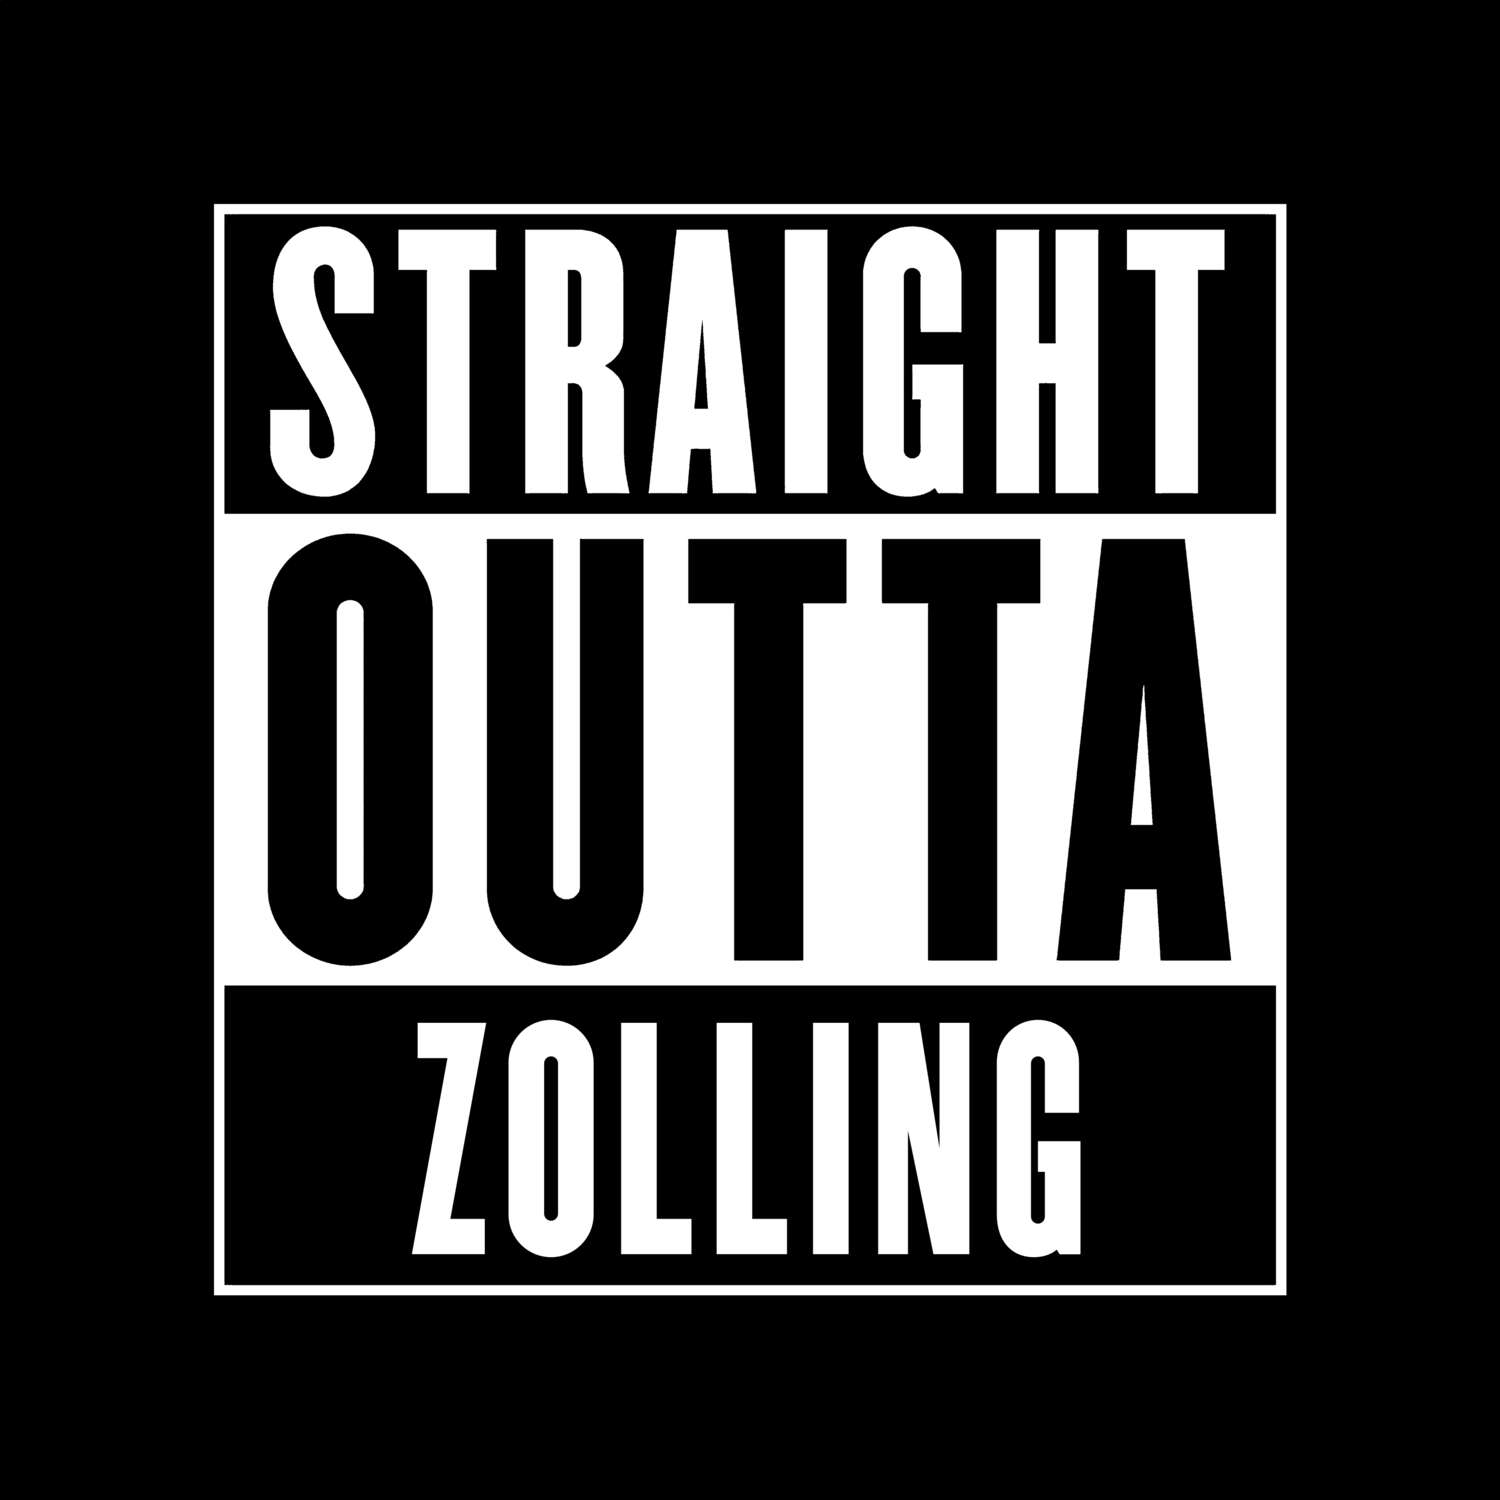 Zolling T-Shirt »Straight Outta«